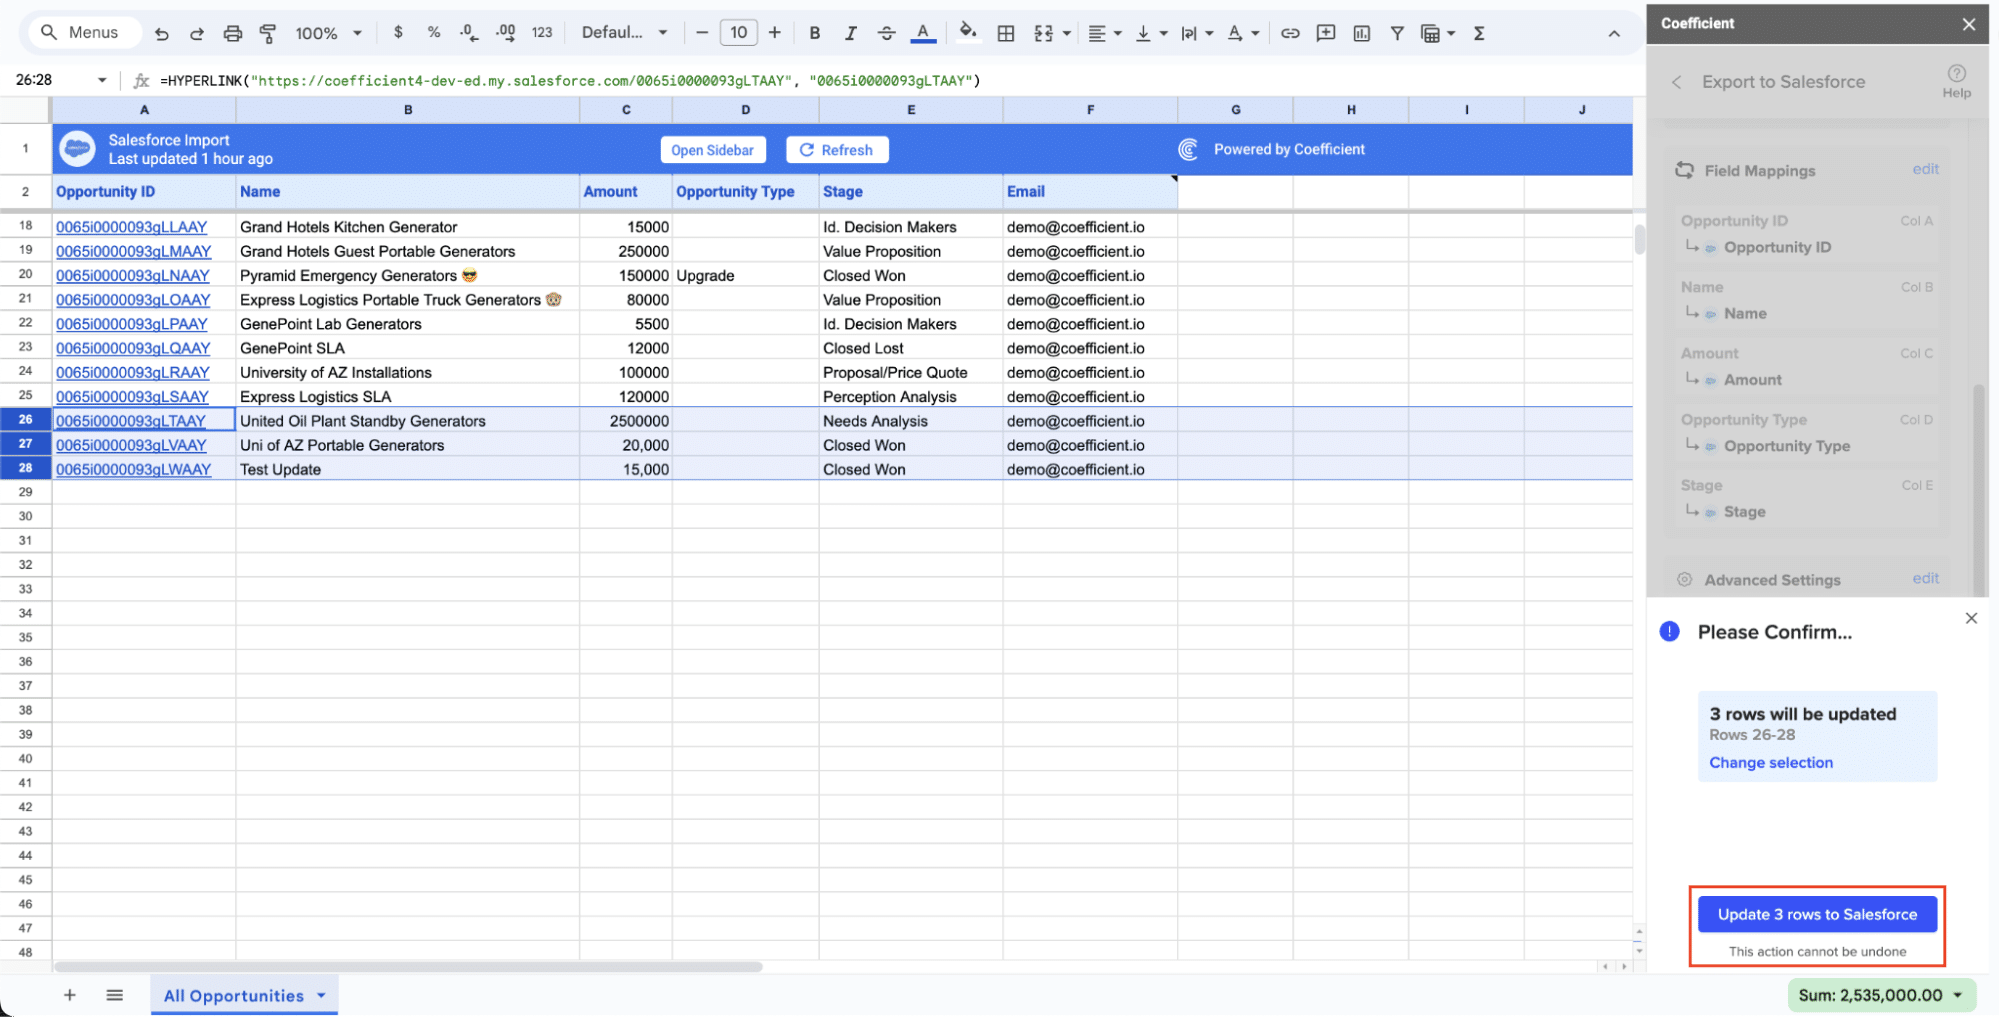 Click on "Update Rows in Salesforce" to push the data from Google Sheets to Salesforce
